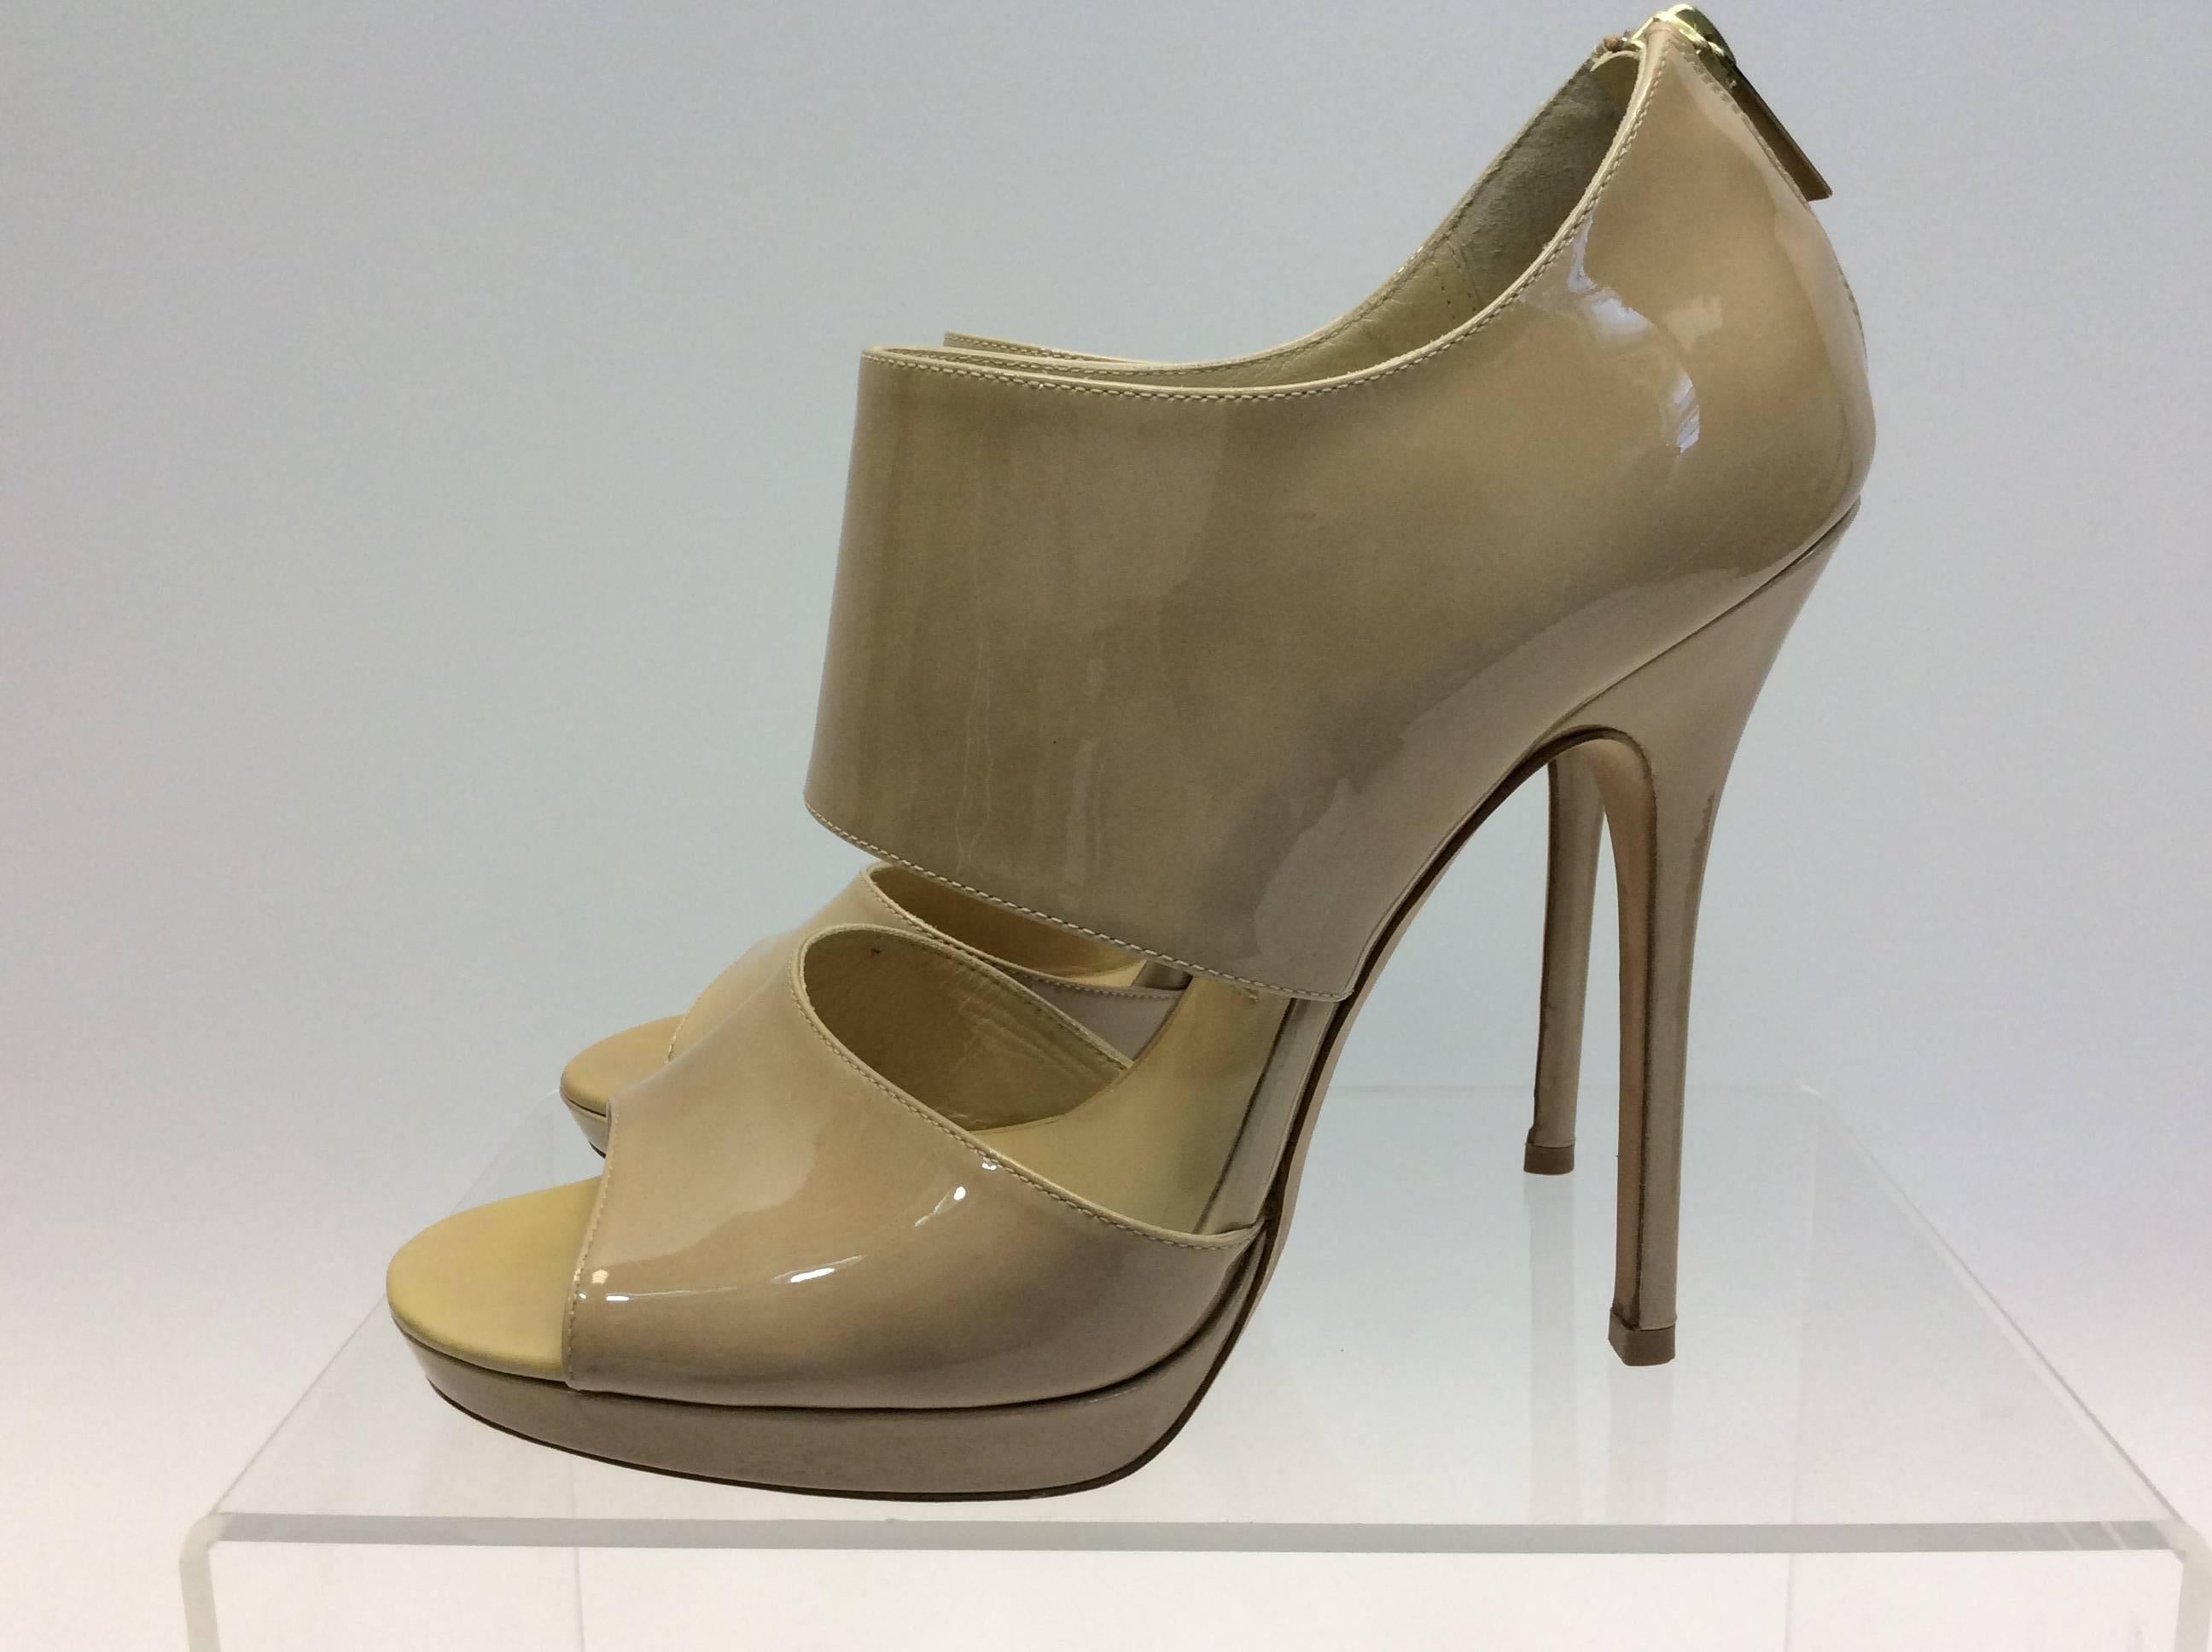 Jimmy Choo  Nude Patent Leather Heels
Leather
$350
5